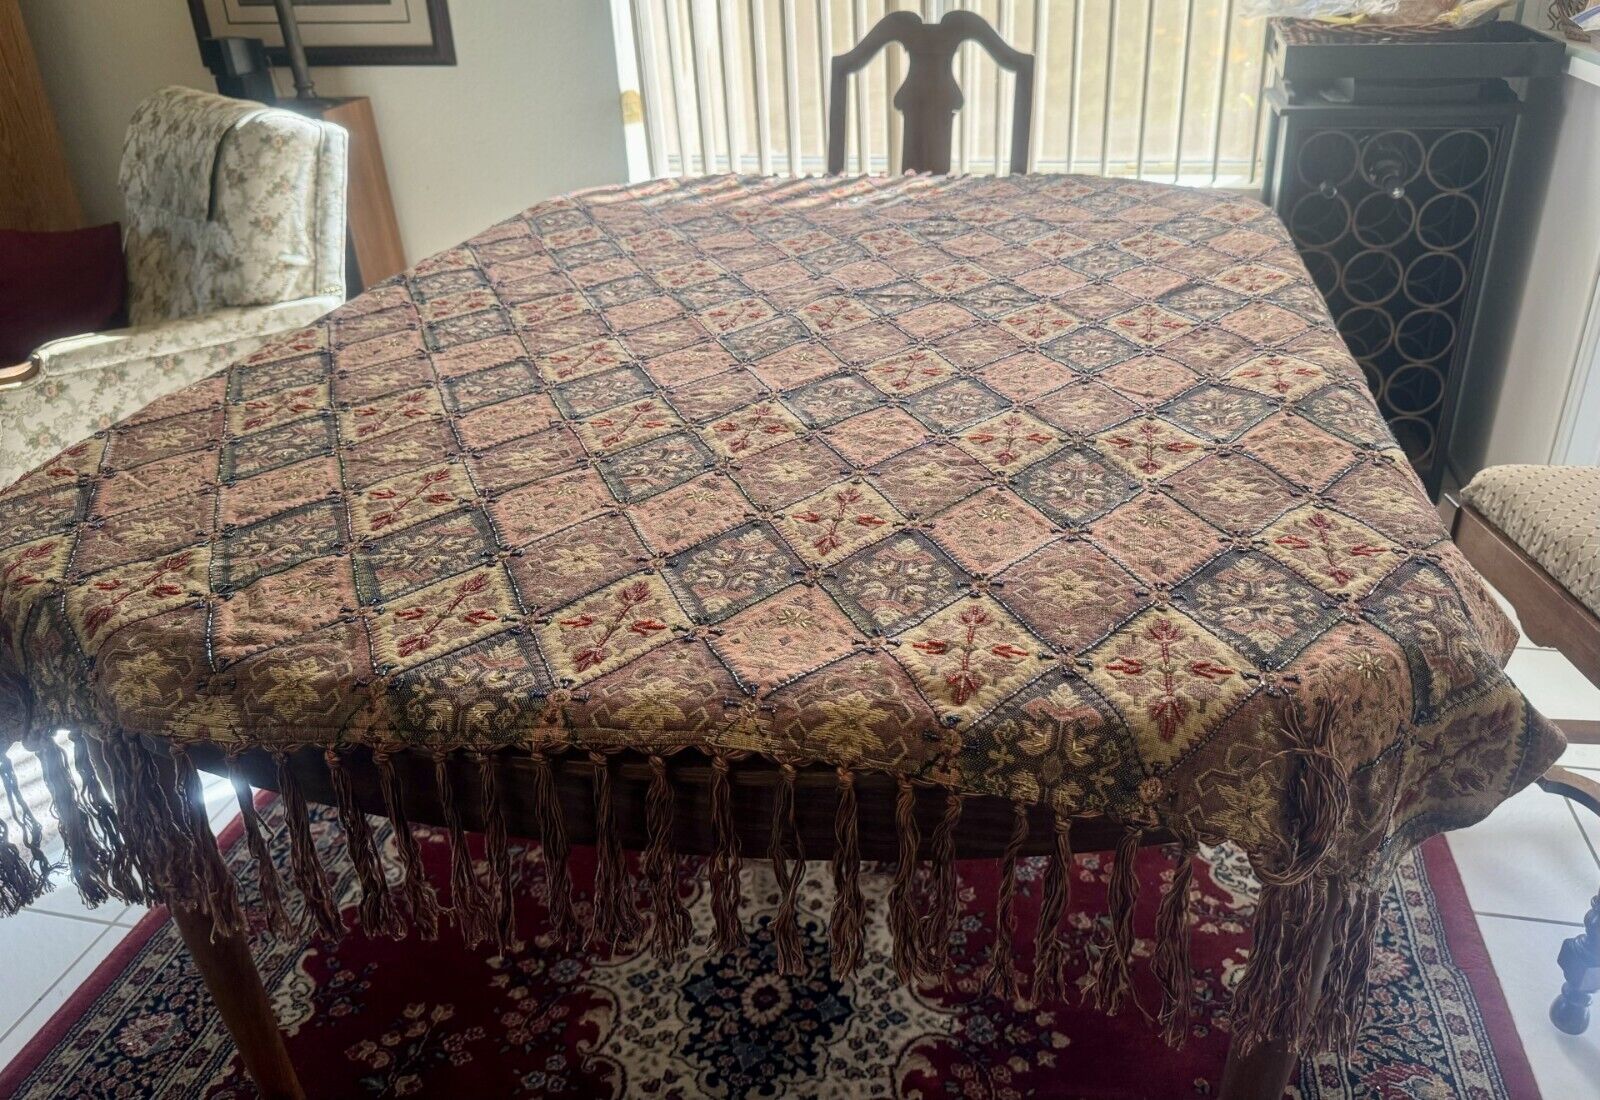 PIER 1 IMPORTS BOHO TABLECLOTH BROWN BEADED TAPESTRY 51”x58”